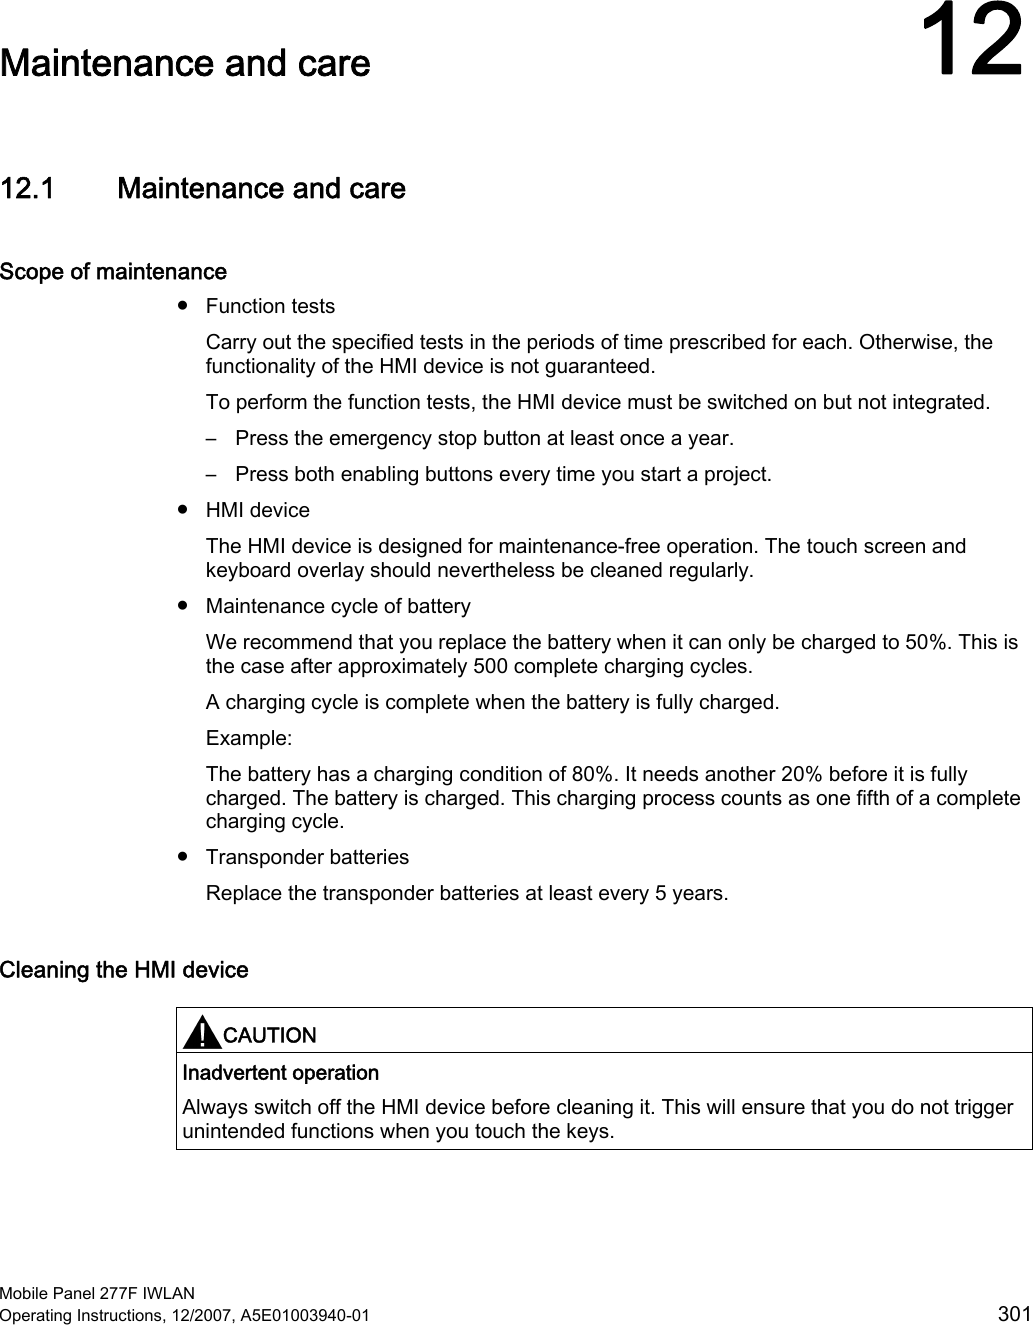  Mobile Panel 277F IWLAN Operating Instructions, 12/2007, A5E01003940-01  301 Maintenance and care  1212.1 Maintenance and care Scope of maintenance ●  Function tests Carry out the specified tests in the periods of time prescribed for each. Otherwise, the functionality of the HMI device is not guaranteed.  To perform the function tests, the HMI device must be switched on but not integrated. –  Press the emergency stop button at least once a year. –  Press both enabling buttons every time you start a project. ●  HMI device The HMI device is designed for maintenance-free operation. The touch screen and keyboard overlay should nevertheless be cleaned regularly.  ●  Maintenance cycle of battery We recommend that you replace the battery when it can only be charged to 50%. This is the case after approximately 500 complete charging cycles. A charging cycle is complete when the battery is fully charged. Example: The battery has a charging condition of 80%. It needs another 20% before it is fully charged. The battery is charged. This charging process counts as one fifth of a complete charging cycle.  ●  Transponder batteries Replace the transponder batteries at least every 5 years.  Cleaning the HMI device  CAUTION  Inadvertent operation Always switch off the HMI device before cleaning it. This will ensure that you do not trigger unintended functions when you touch the keys.  